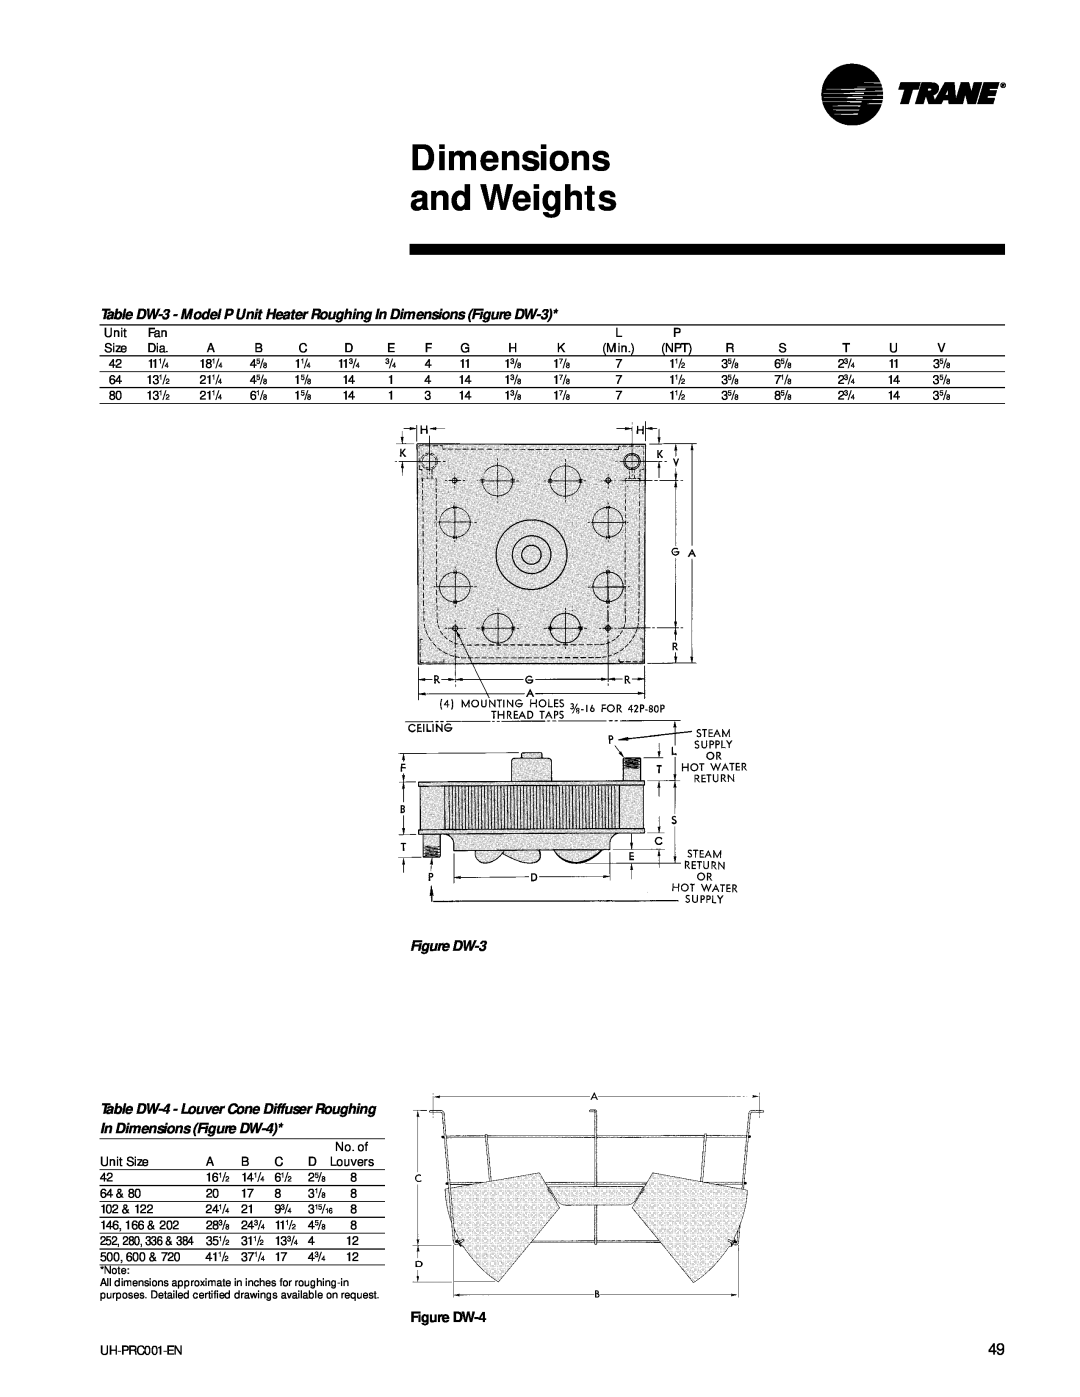 Trane UH-PRC001-EN manual Dimensions and Weights, Figure DW-3, Table DW-4- Louver Cone Diffuser Roughing, Figure DW-4 